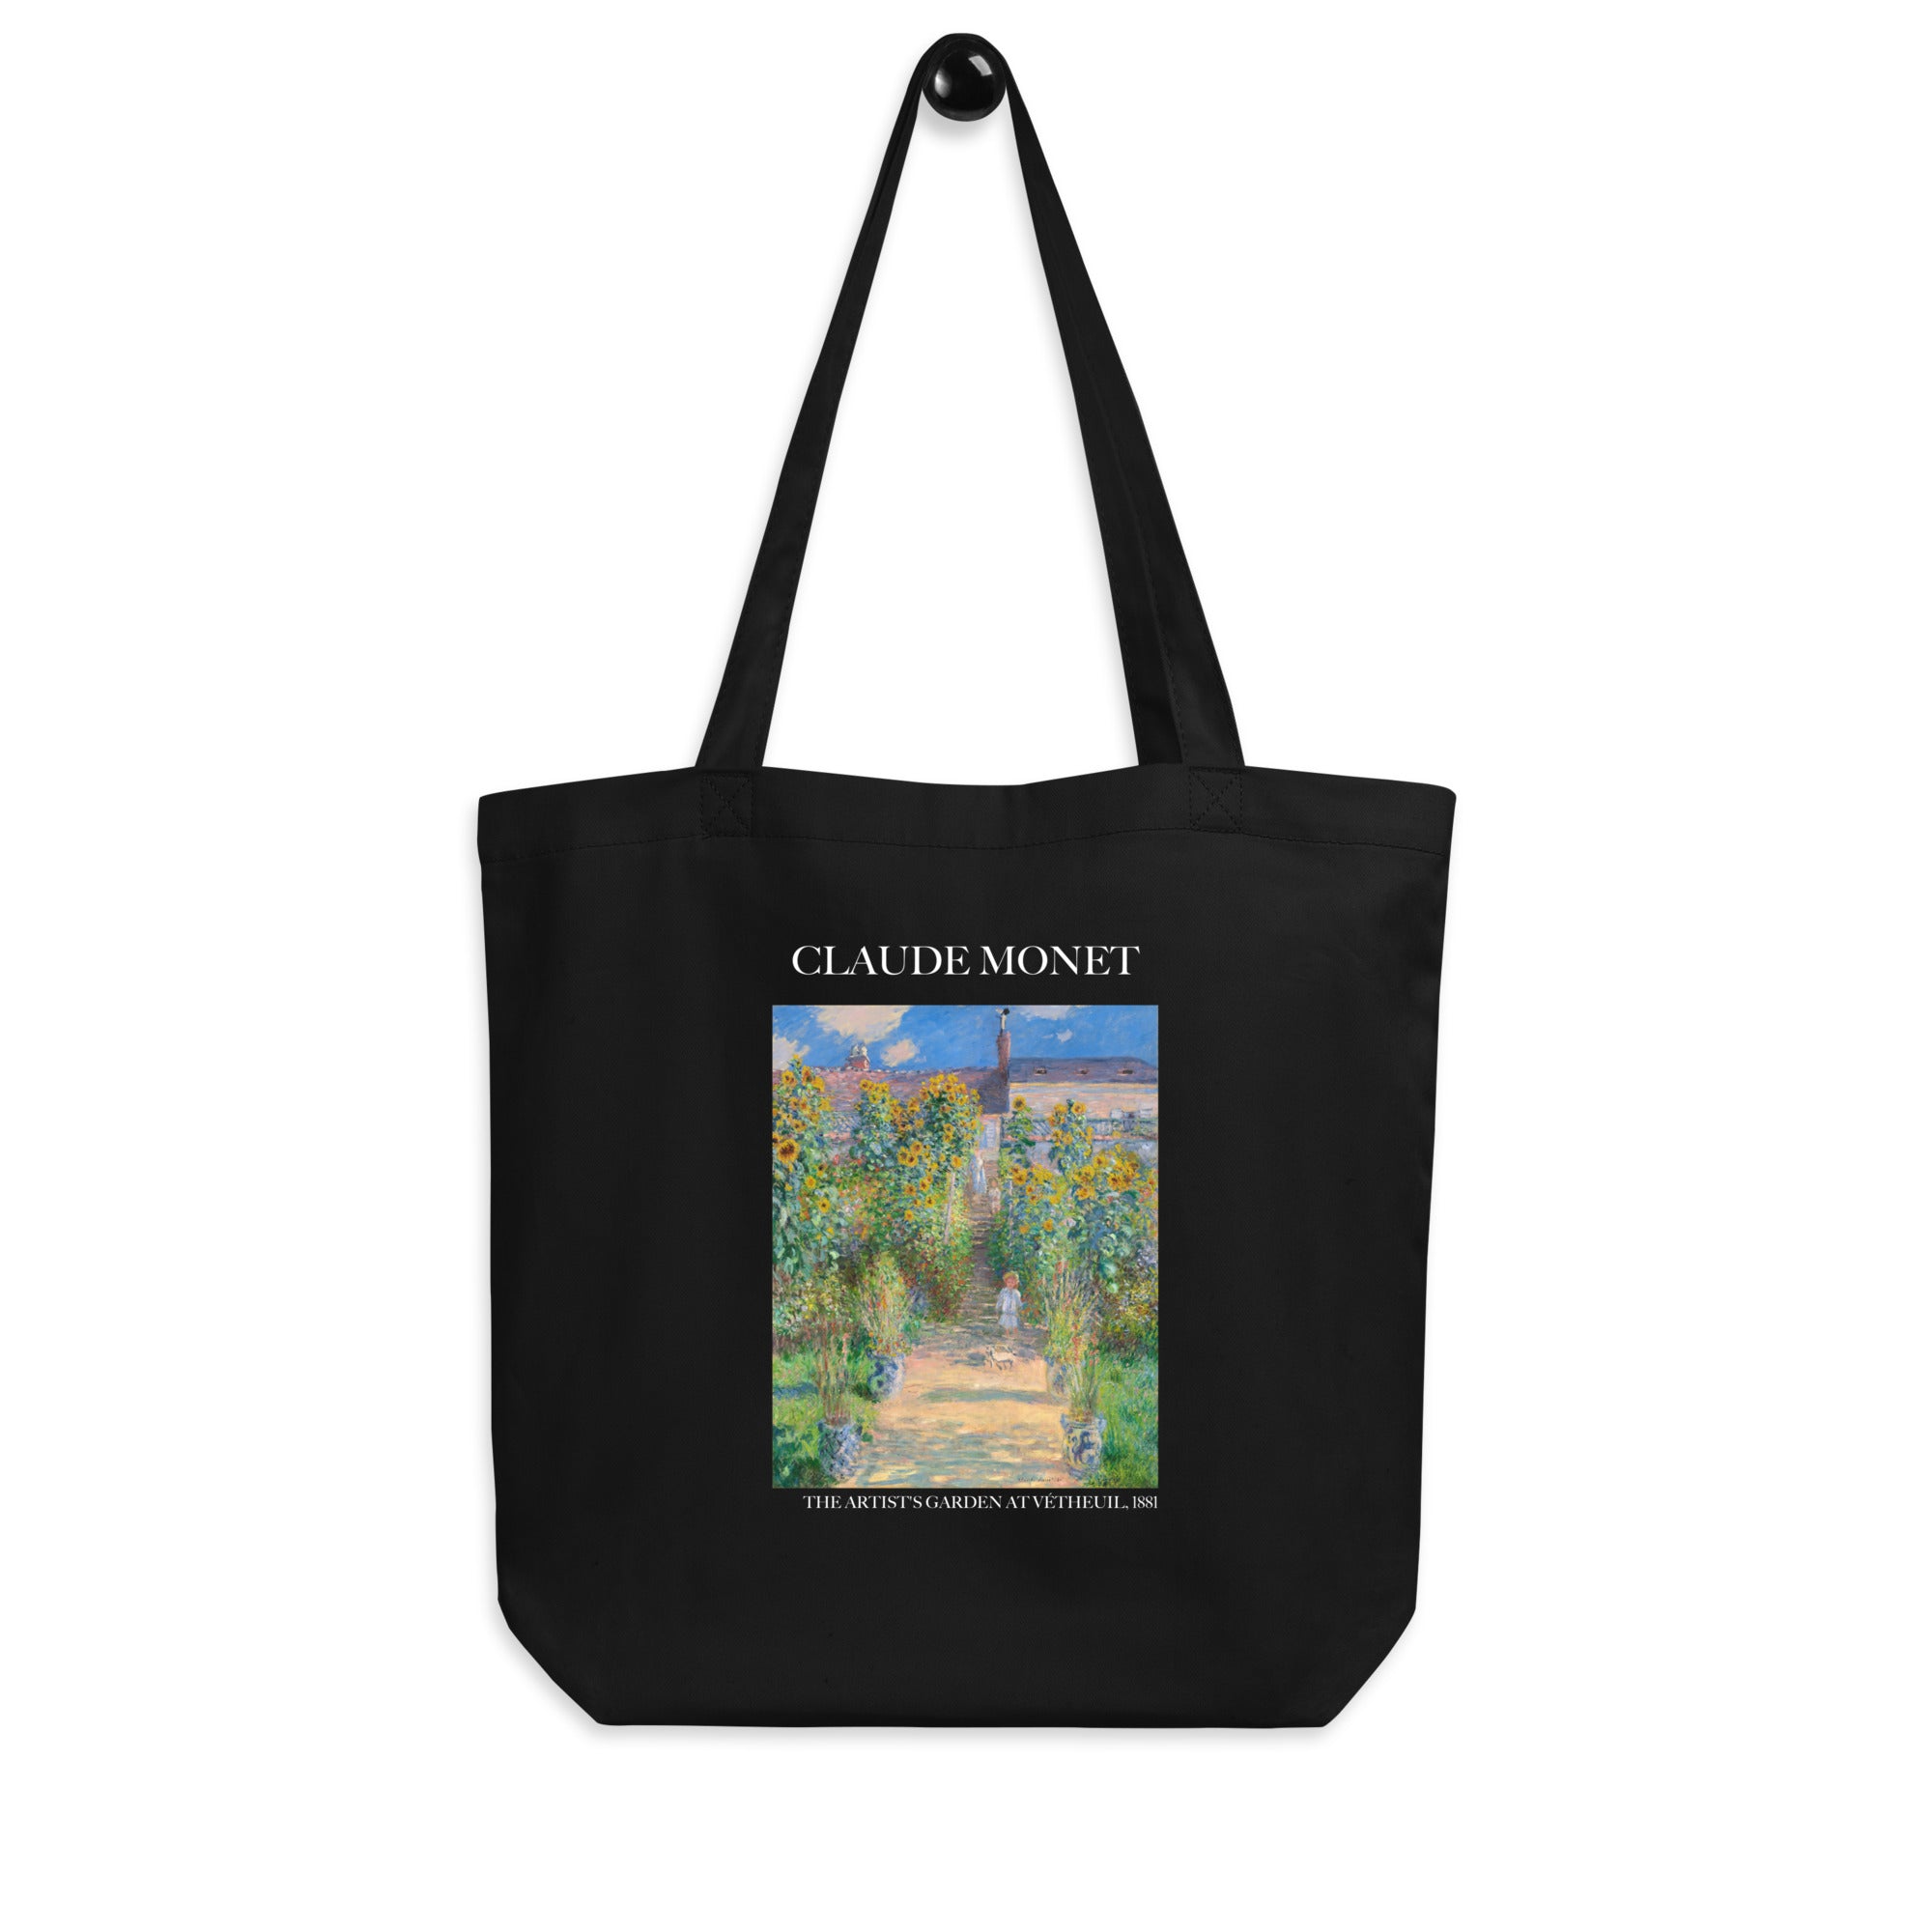 Claude Monet 'The Artist's Garden at Vétheuil' Famous Painting Totebag | Eco Friendly Art Tote Bag